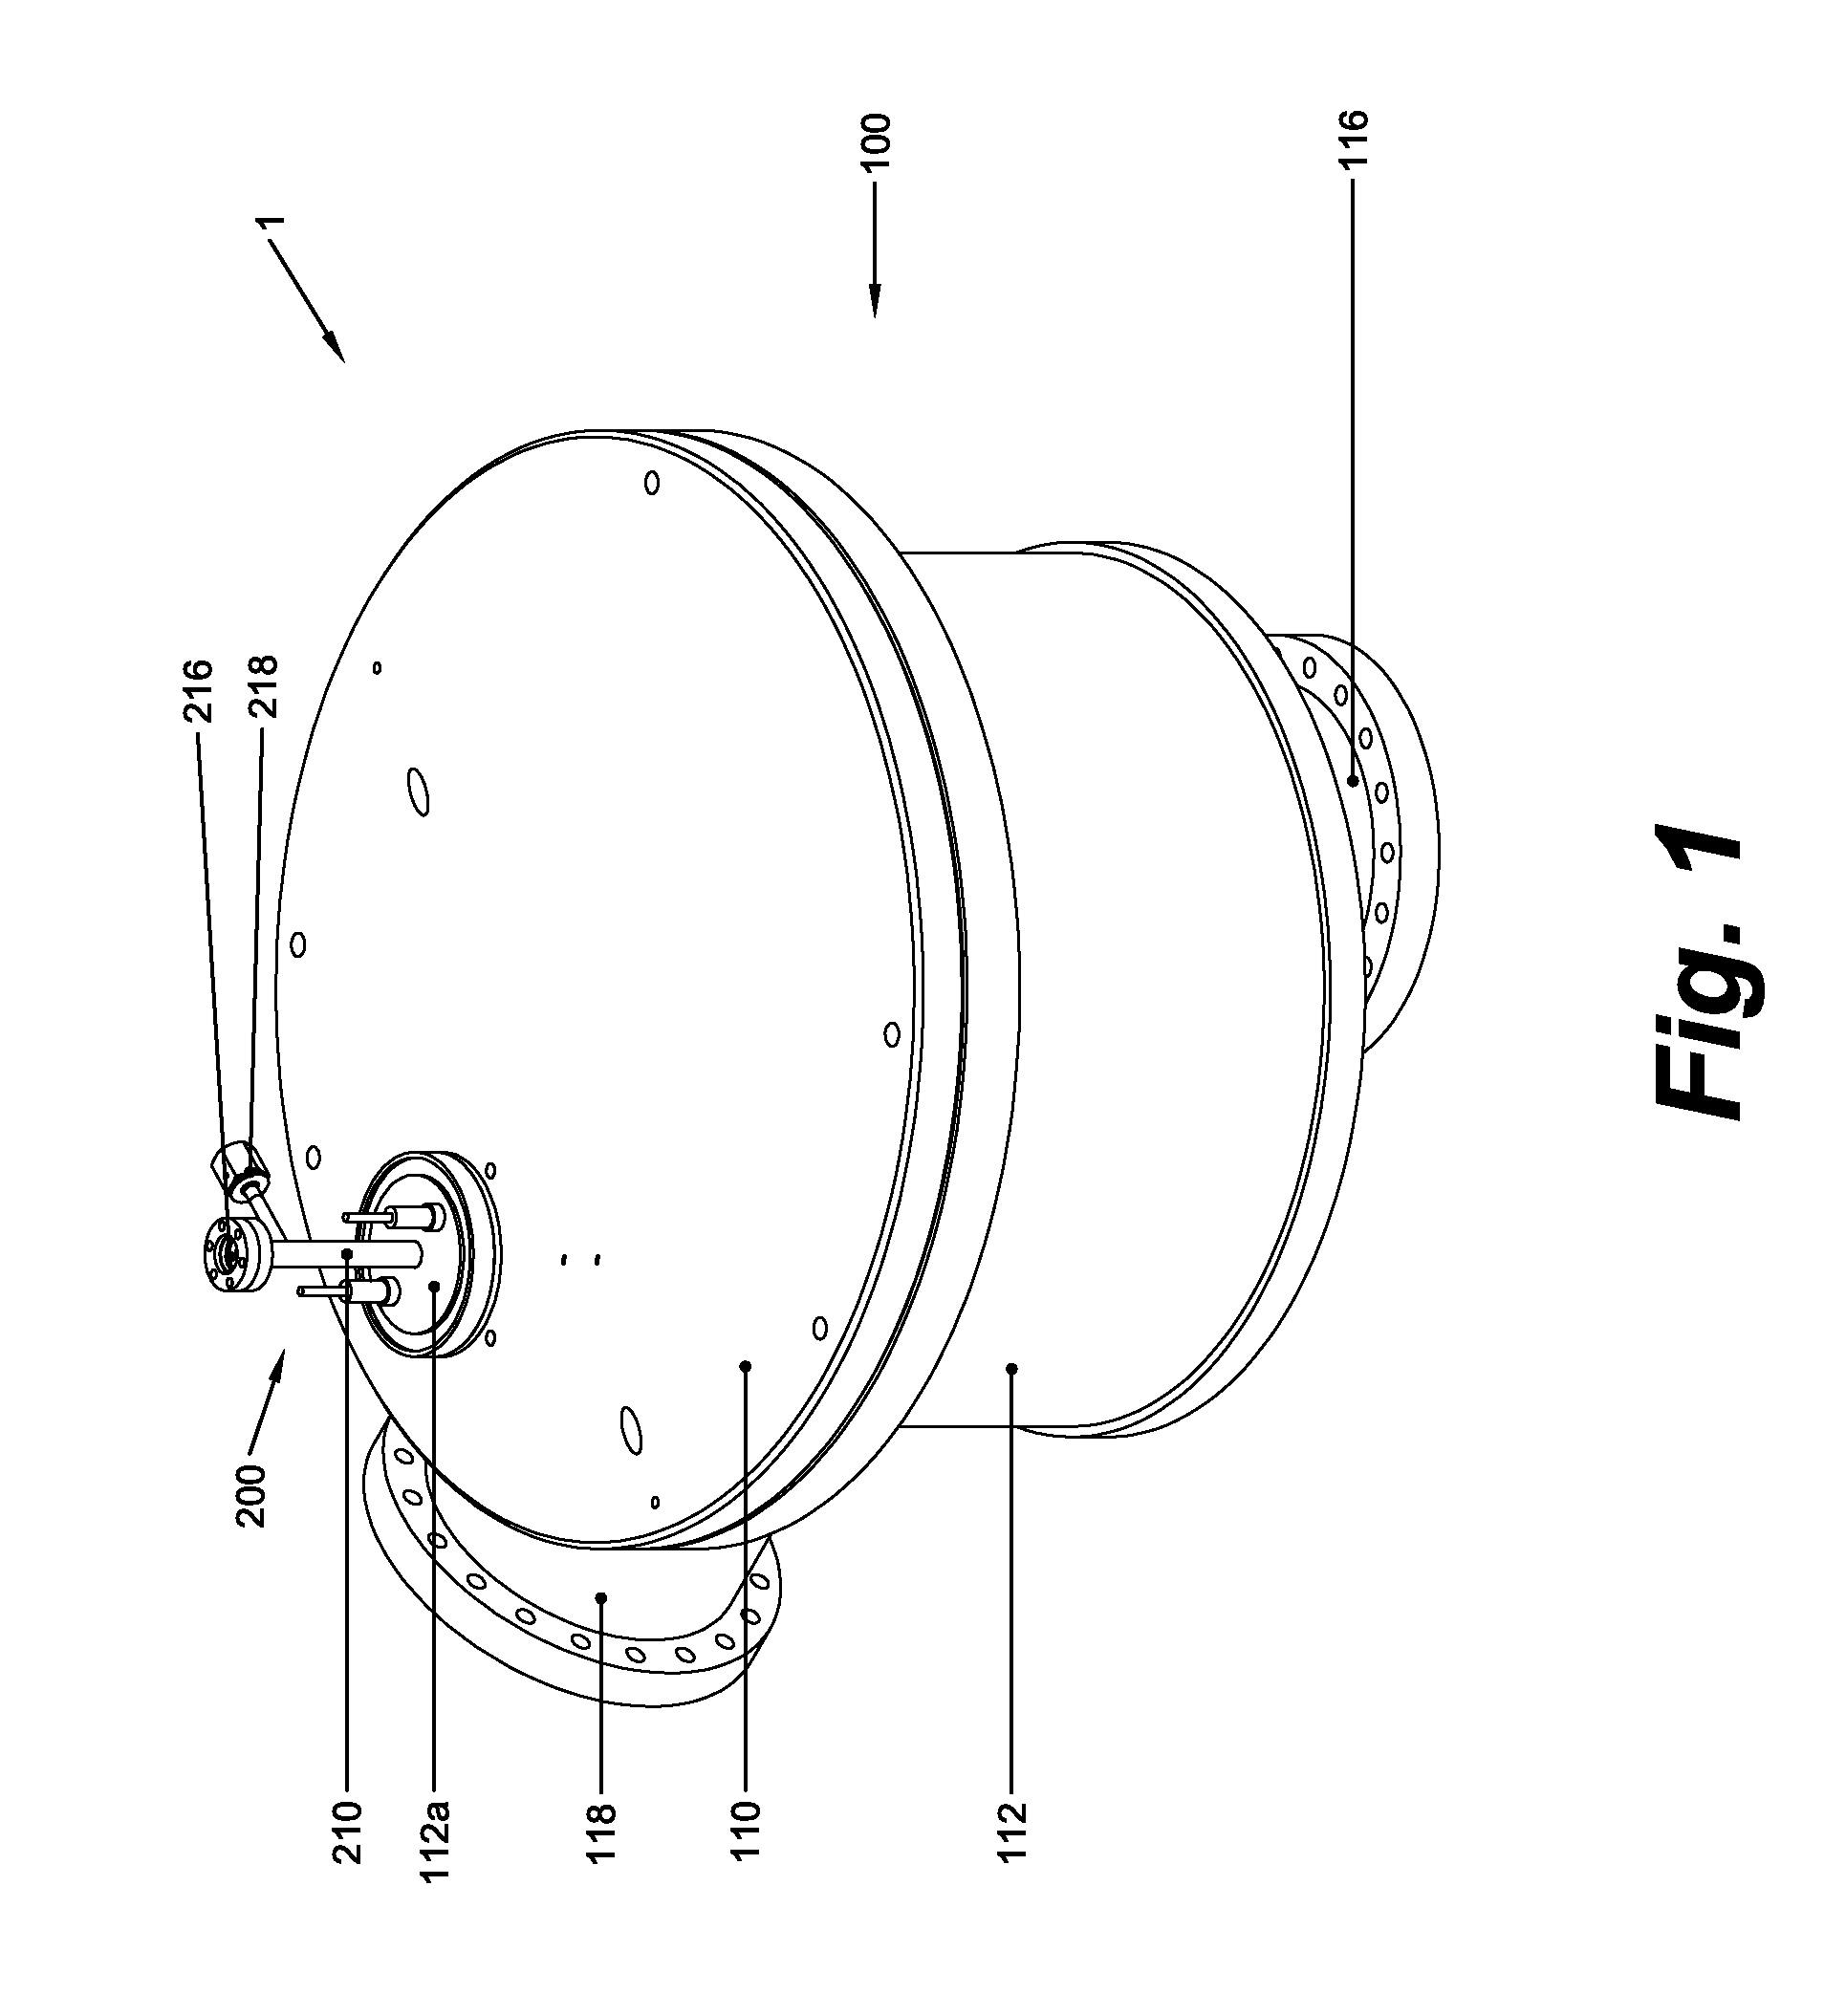 Semiconductor processing apparatus with compact free radical source